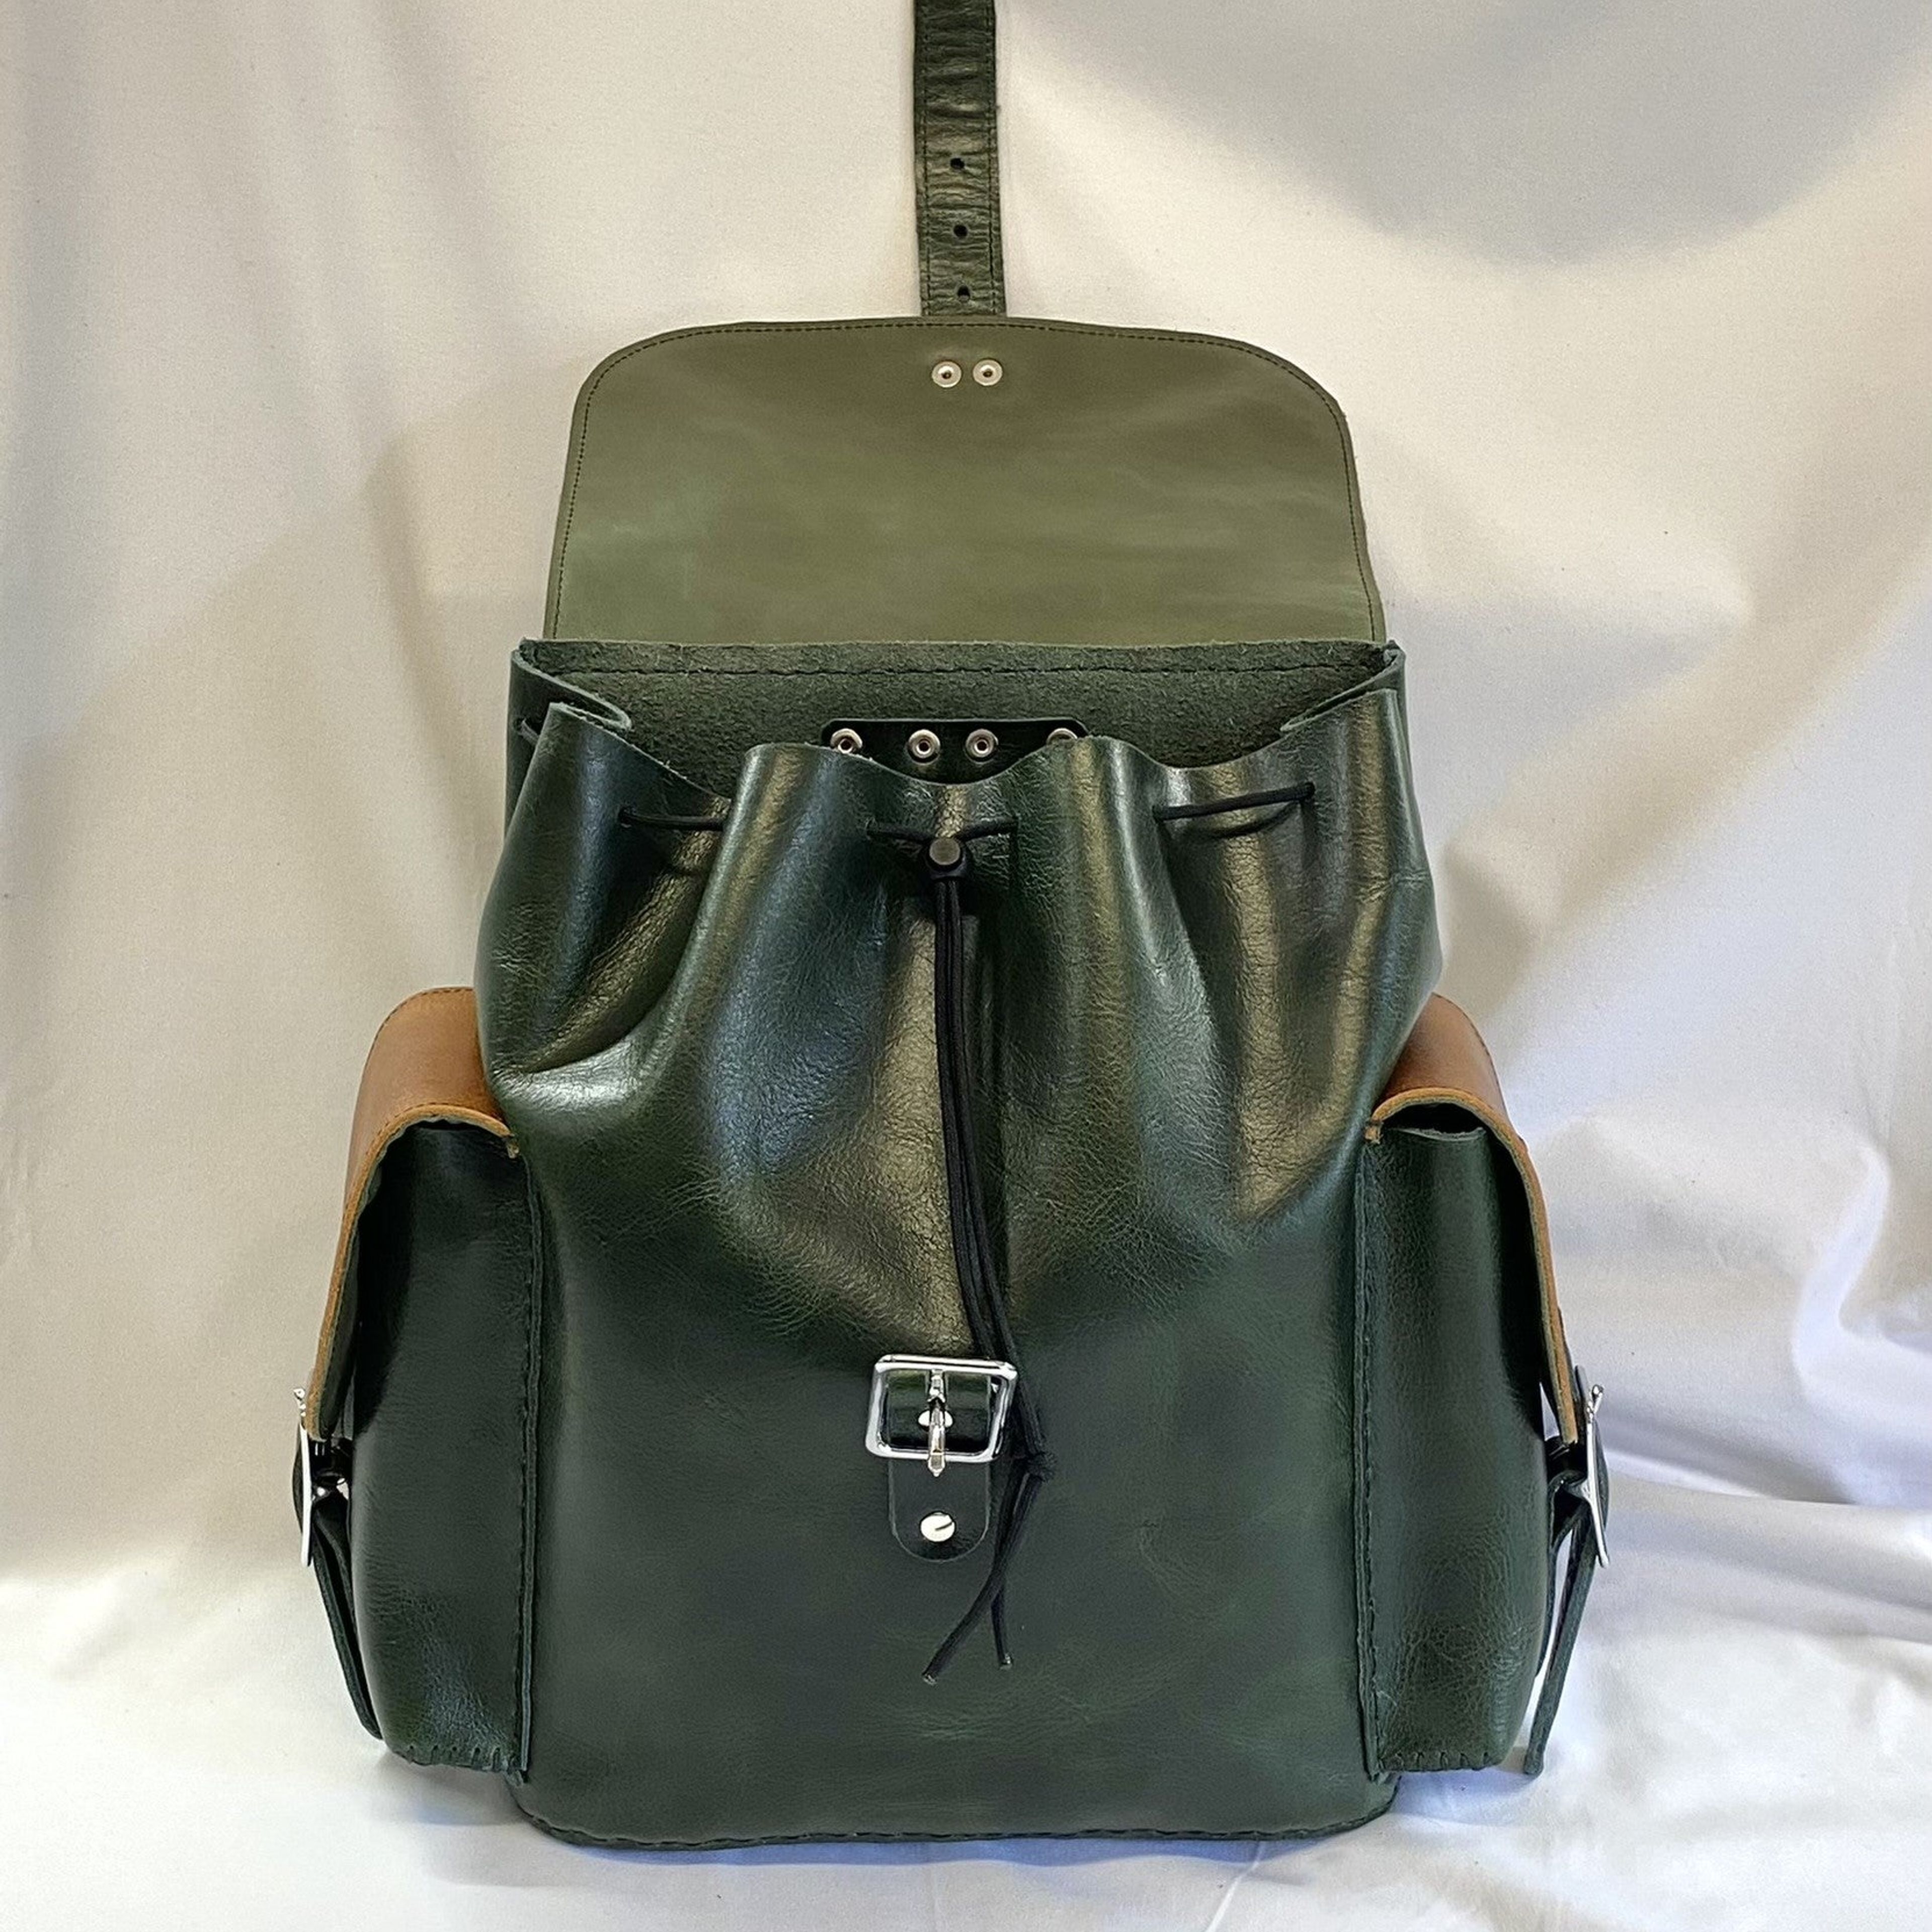 The Chey Backpack